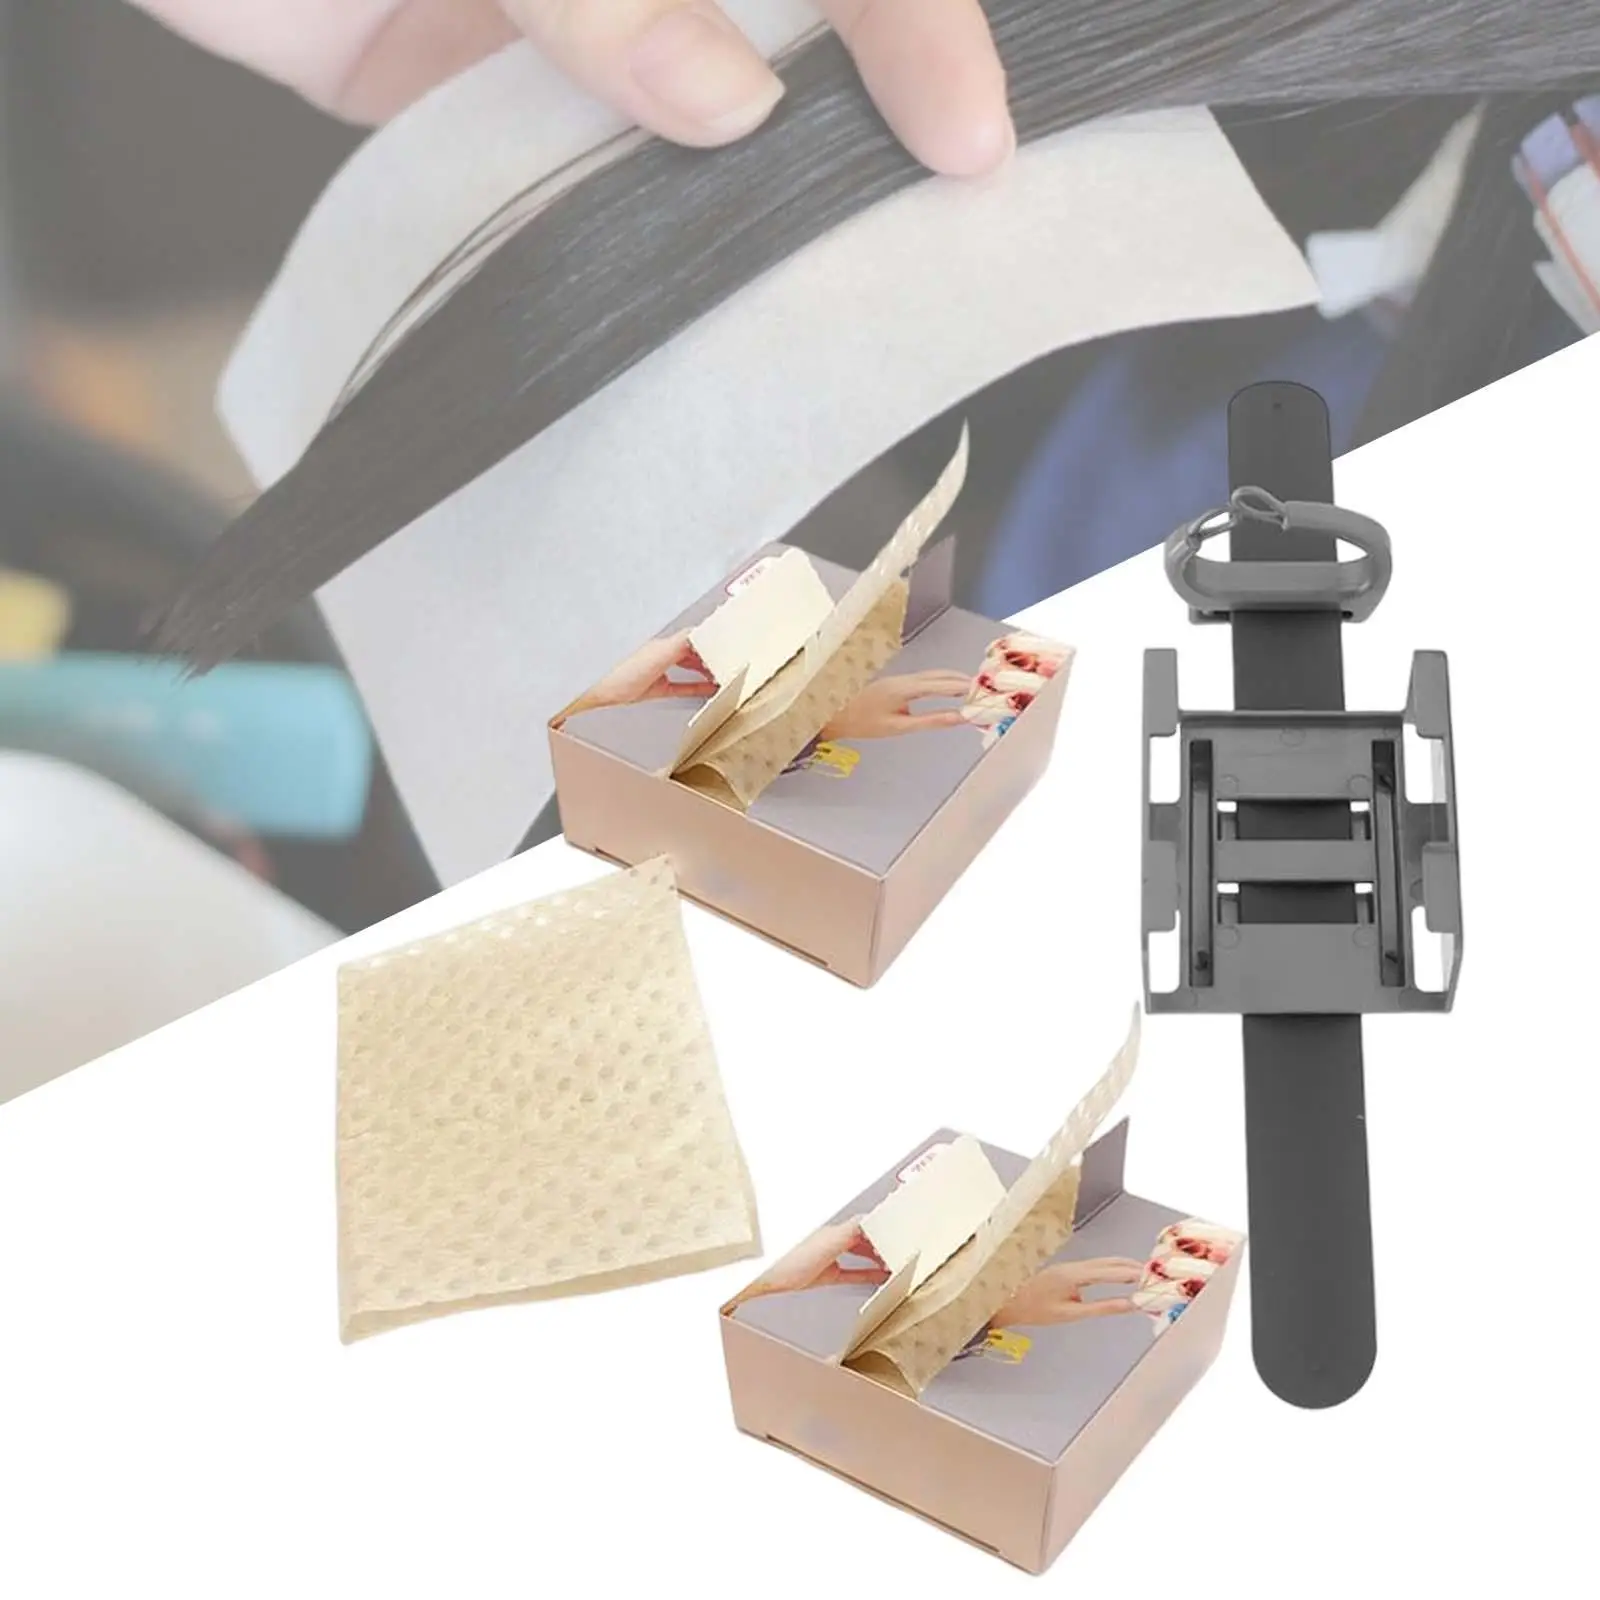 Hair Perming Paper with Holder Practical Disposable Thin Accessories